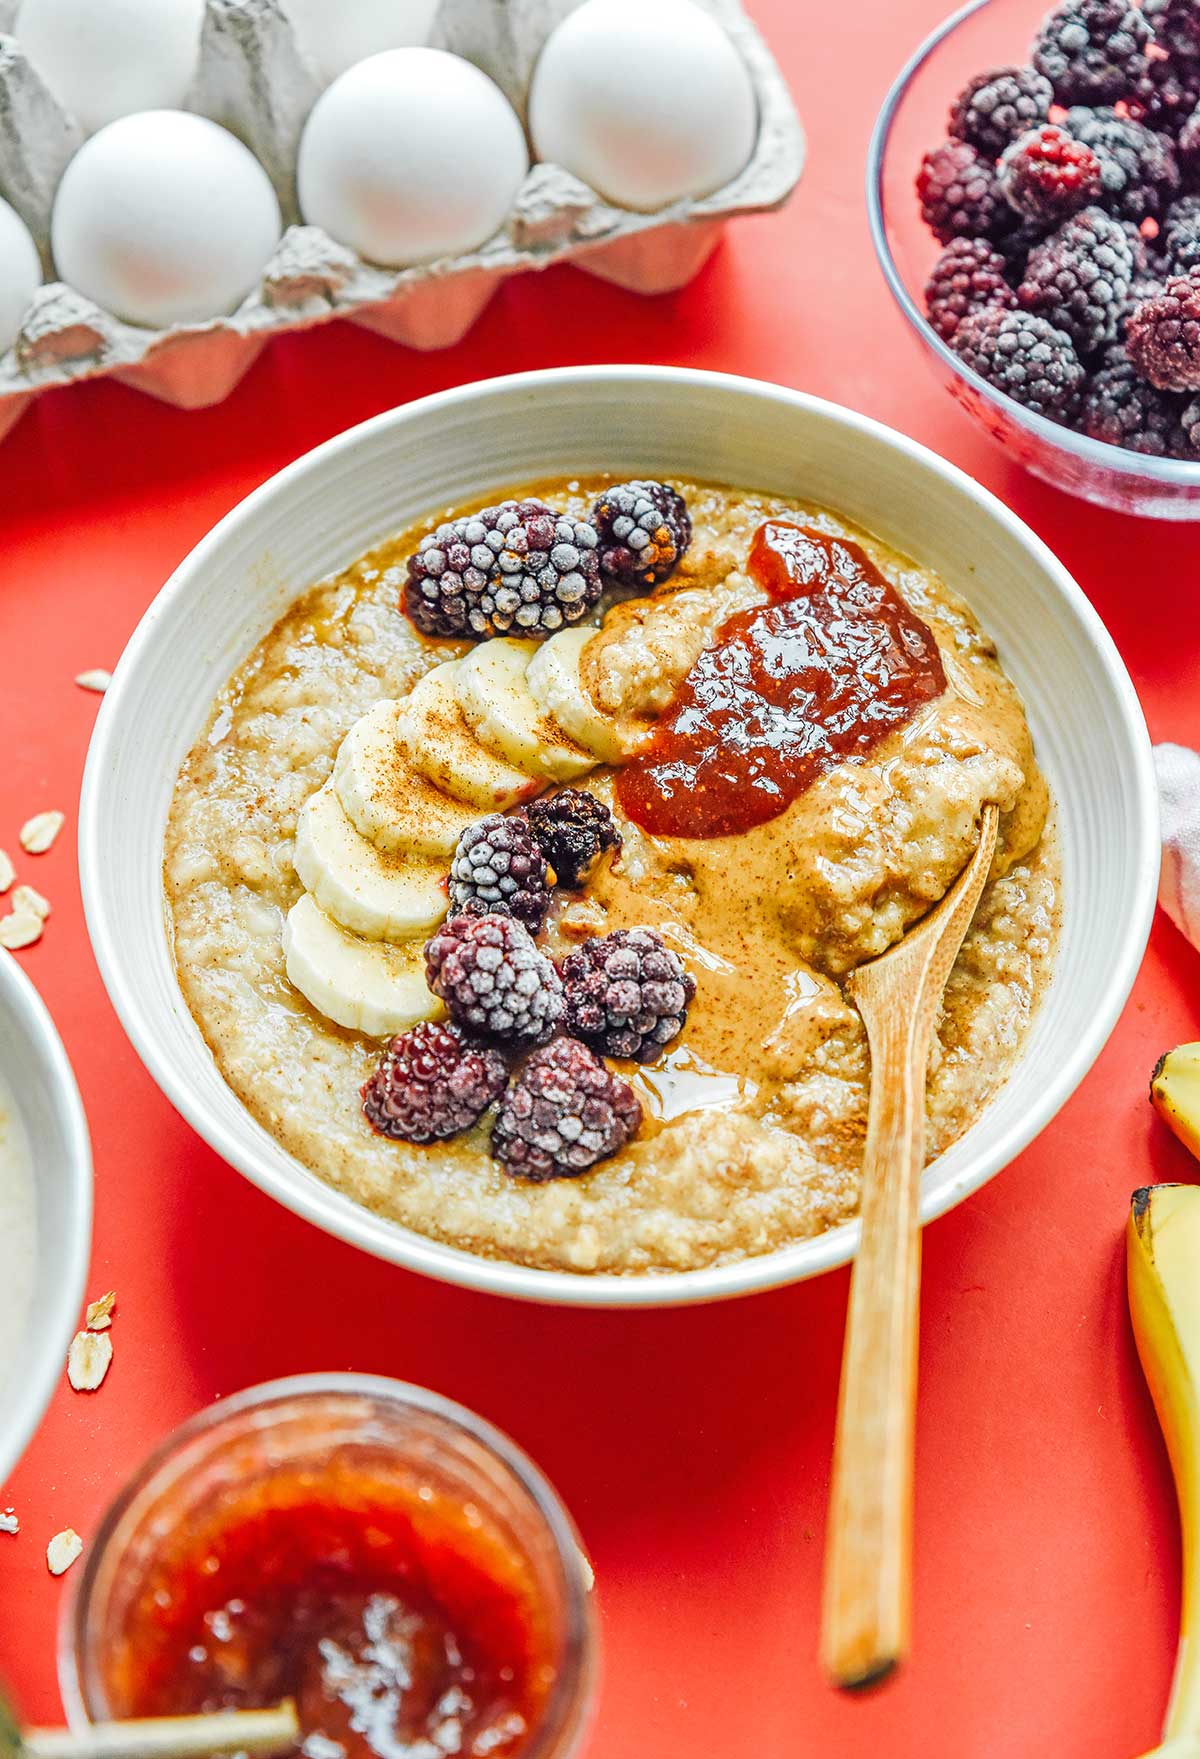 A white bowl filled with egg white oatmeal and topped with bananas, raspberries, jam, peanut butter, and brown sugar